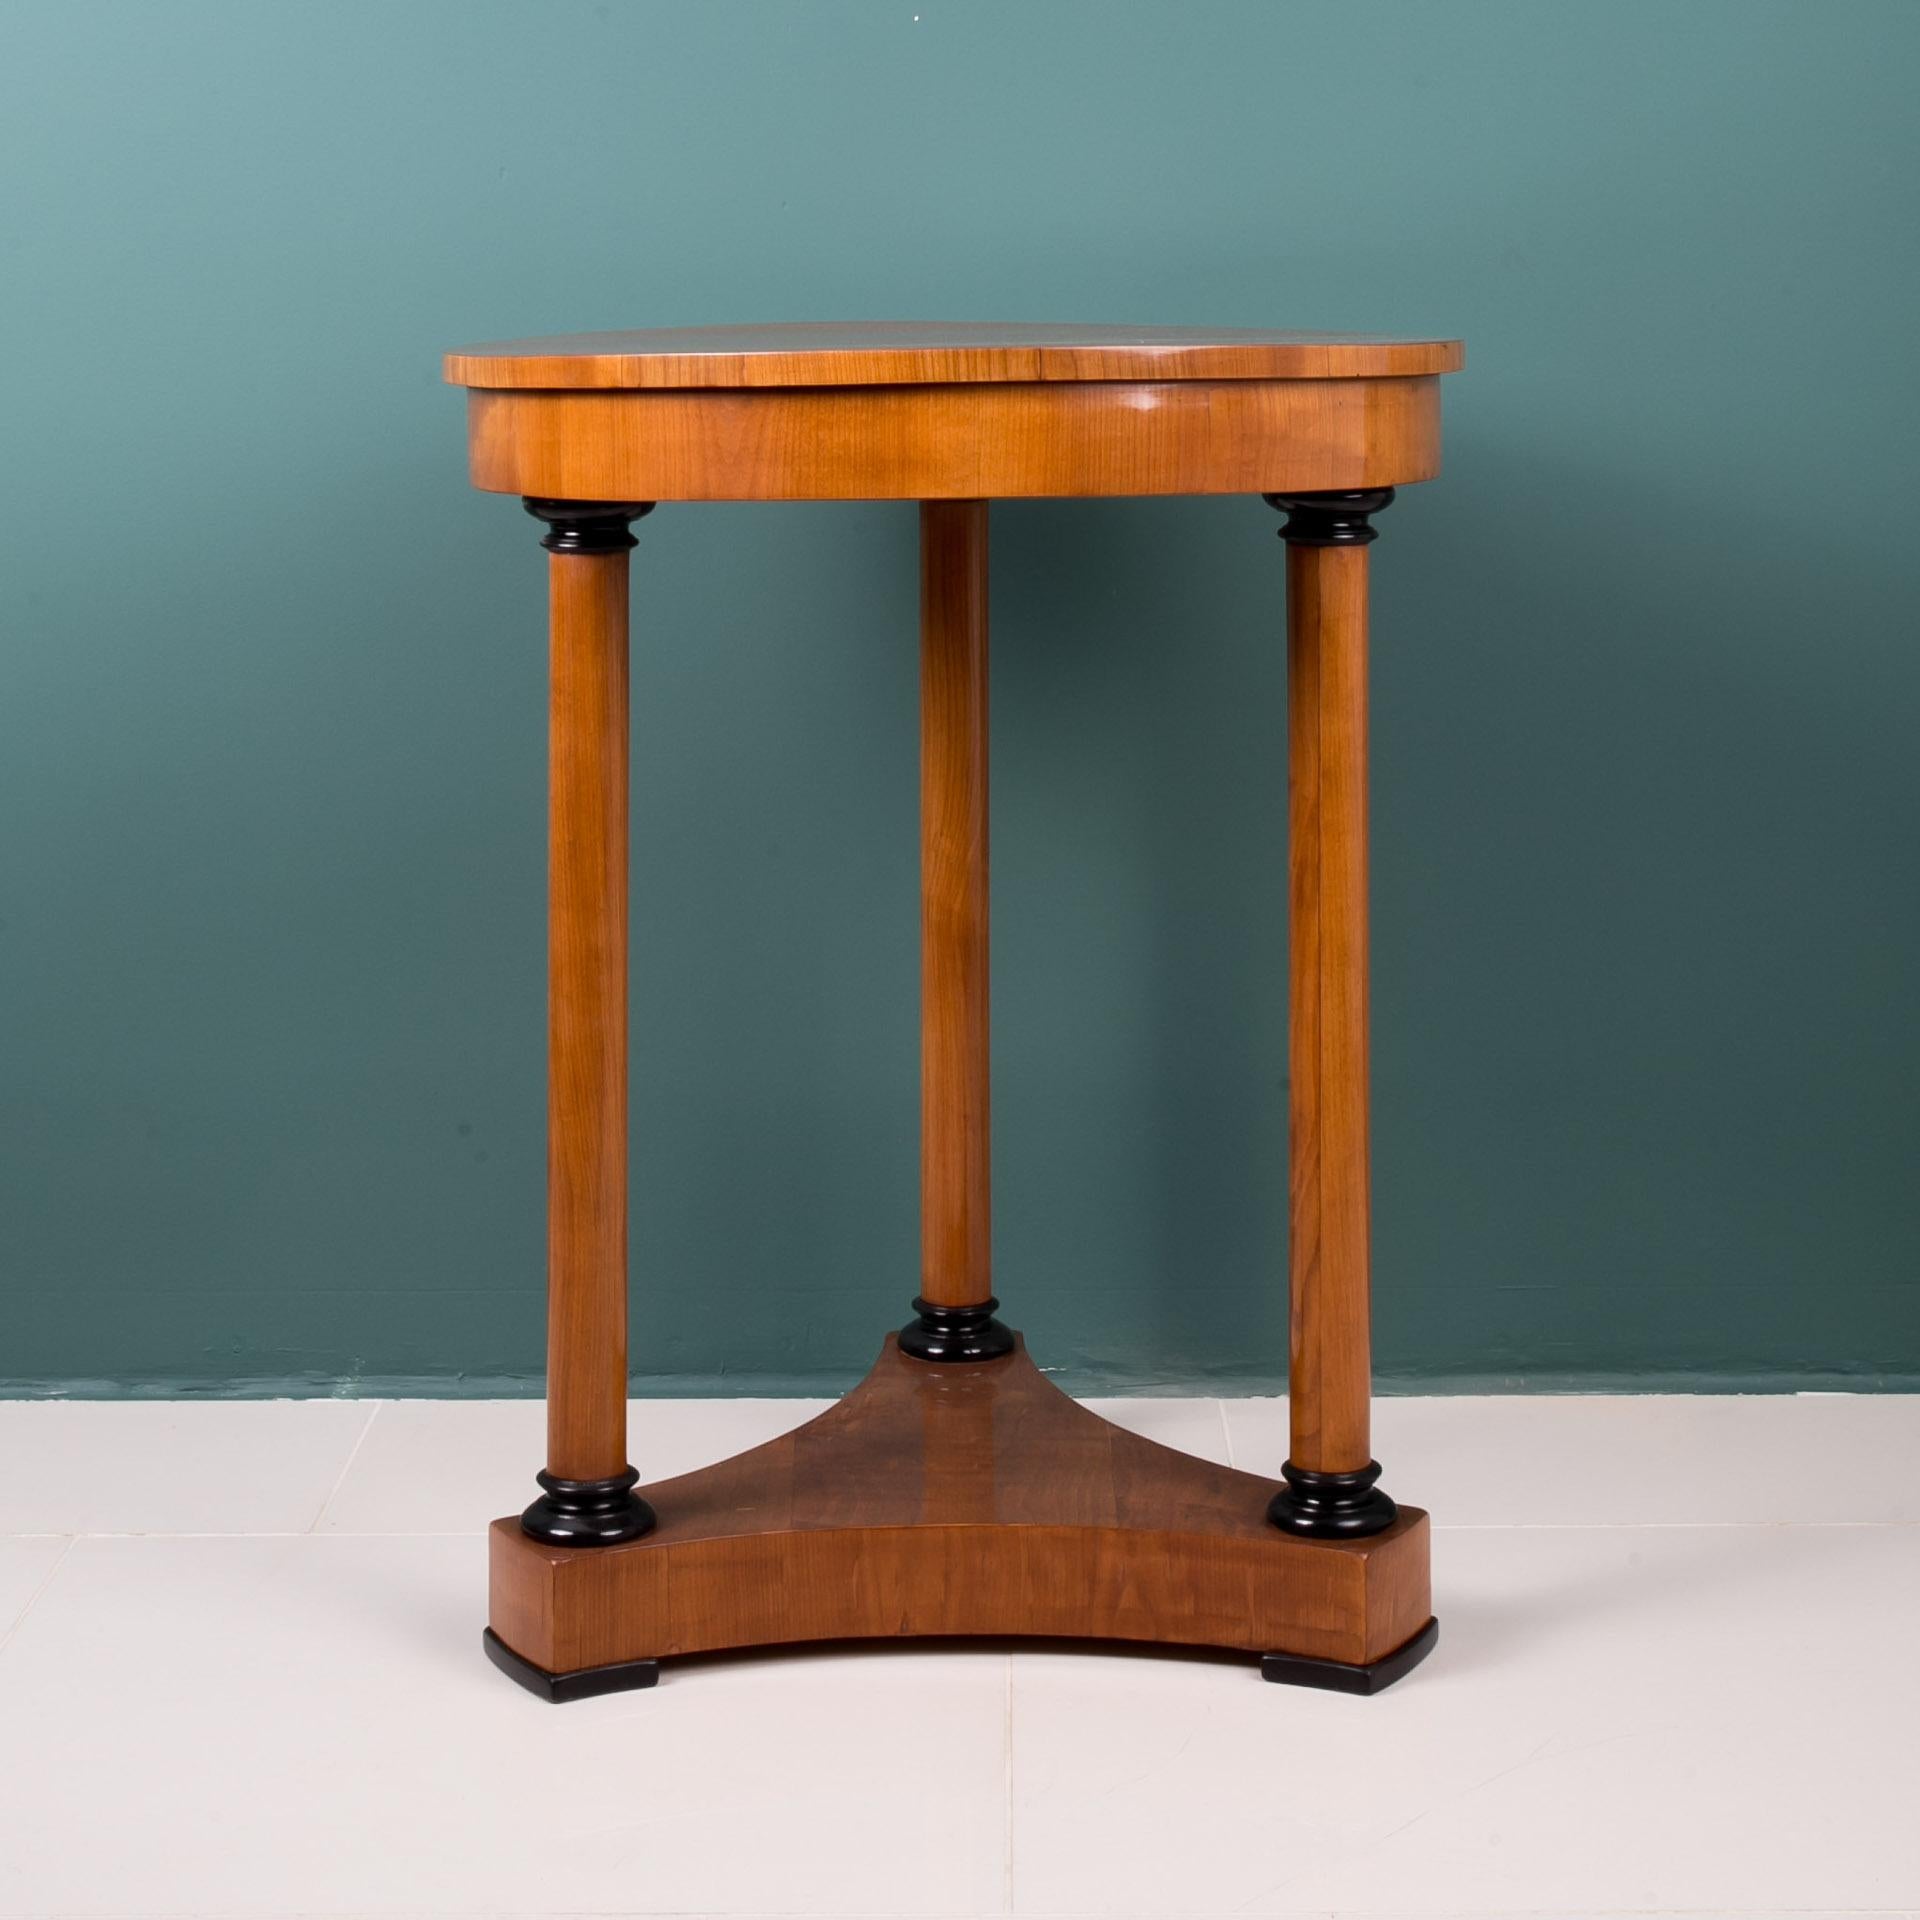 This beautiful Biedermeier table comes from Germany from early 19th century. It is supported on three slender legs that give it elegant and delicate look. The piece is after professional renovation process. Surface was finished with shellac polish,